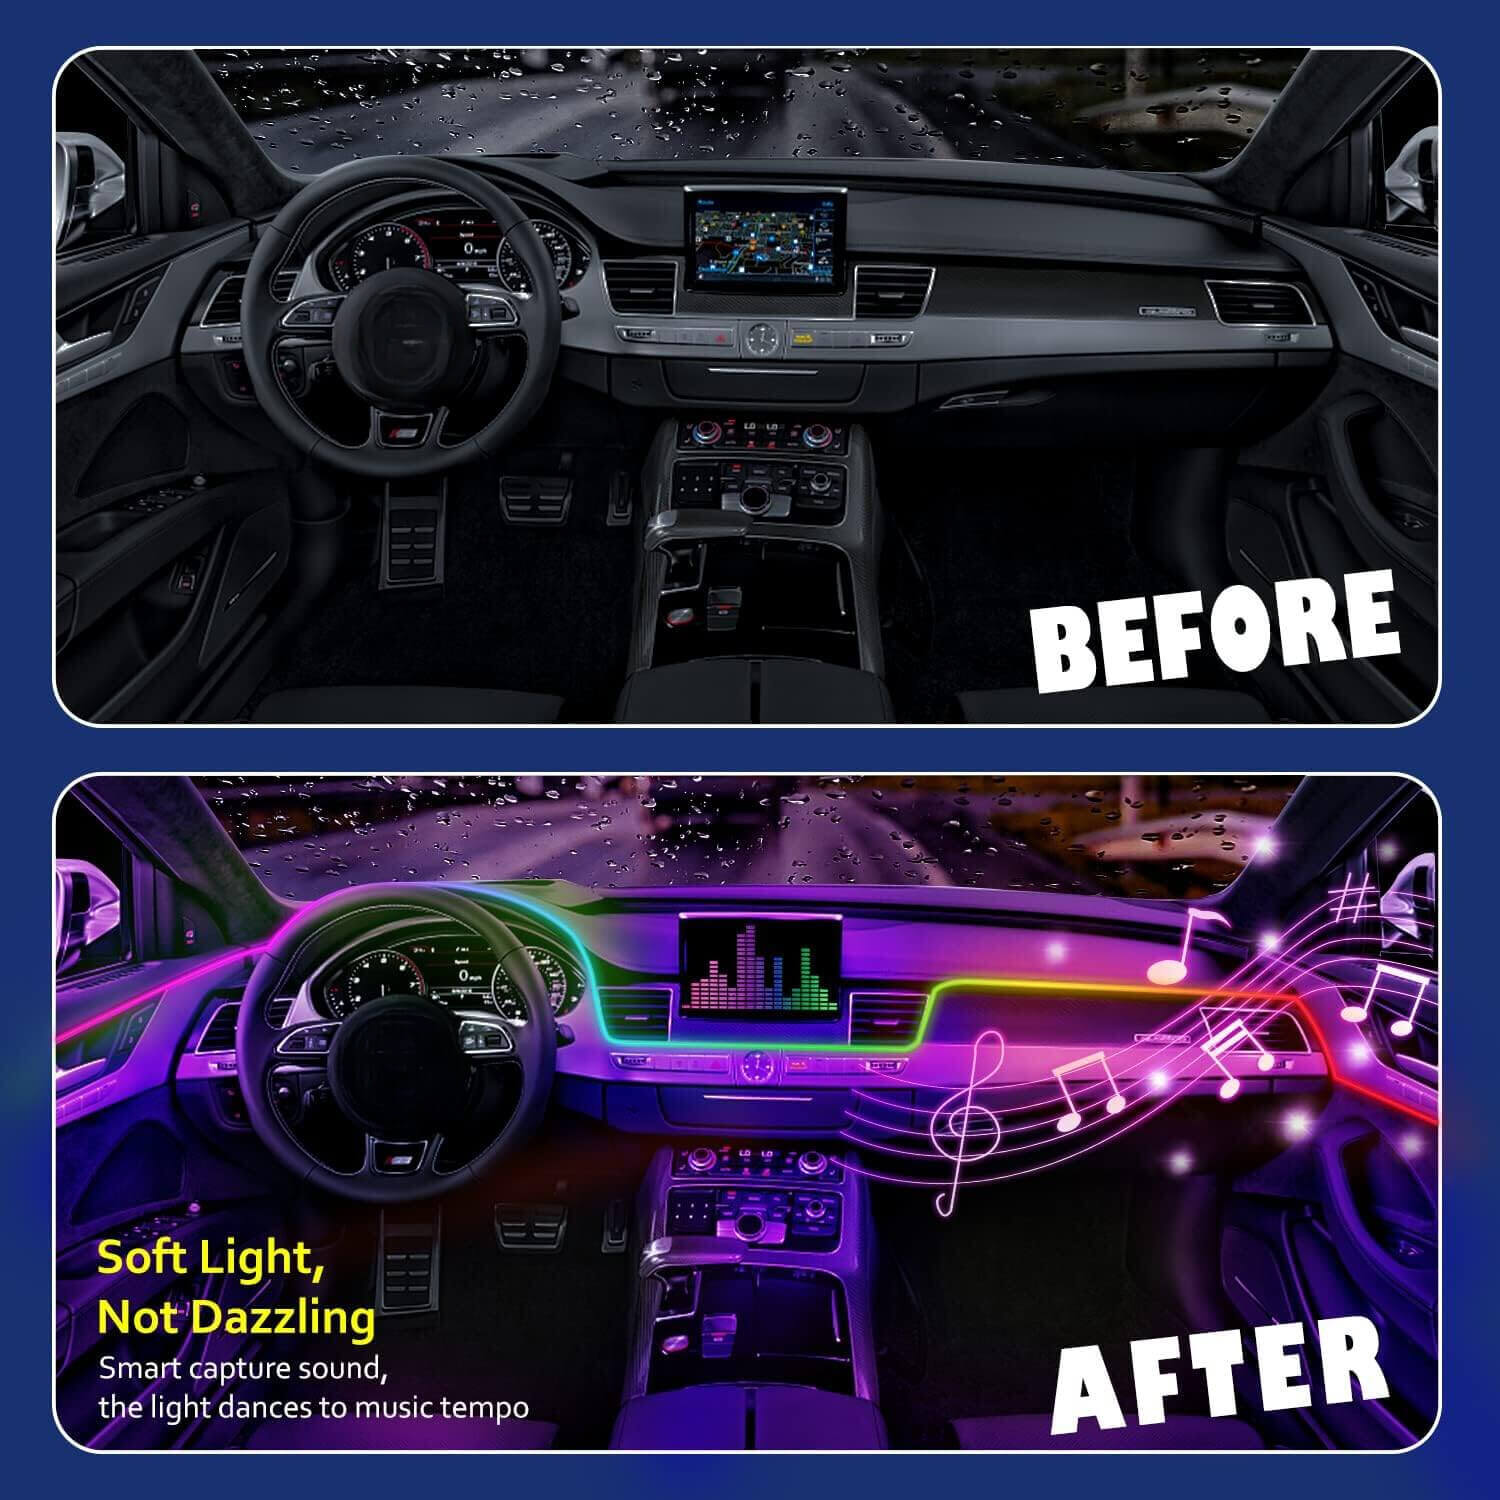 Built-in sound sensitive function, the car atmosphere light can sync any sound captured from microphone, then change colors following the music rhythm as well as your voice.